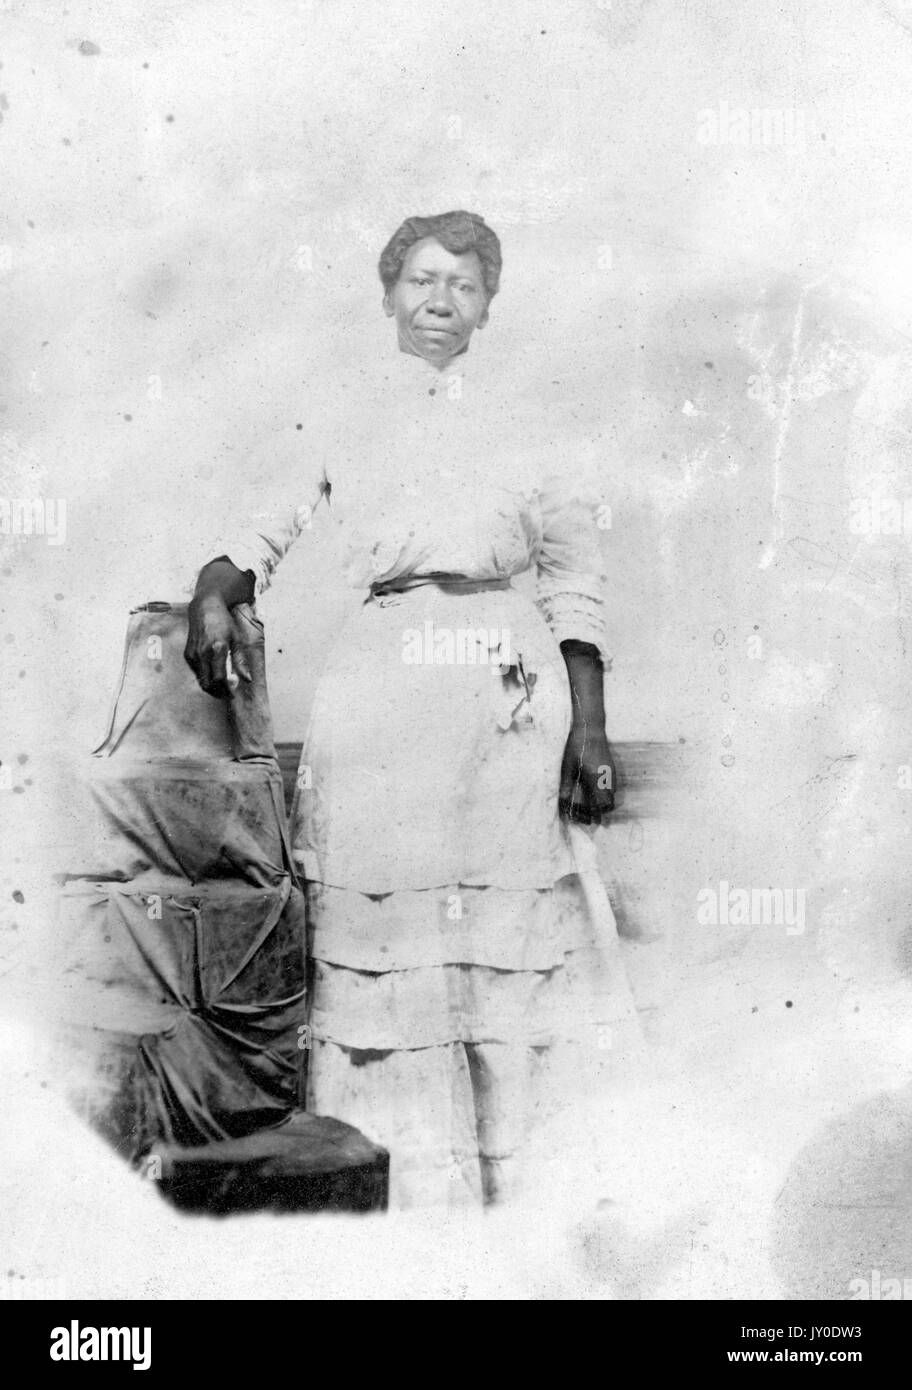 Portrait of an African American woman standing next to a pile of cloth-wrapped items with an upside-down bucket on top, she is wearing a long light colored dress clinched at the waist, her right arm is leaning on the bucket and her left arm is by her side, 1915. Stock Photo